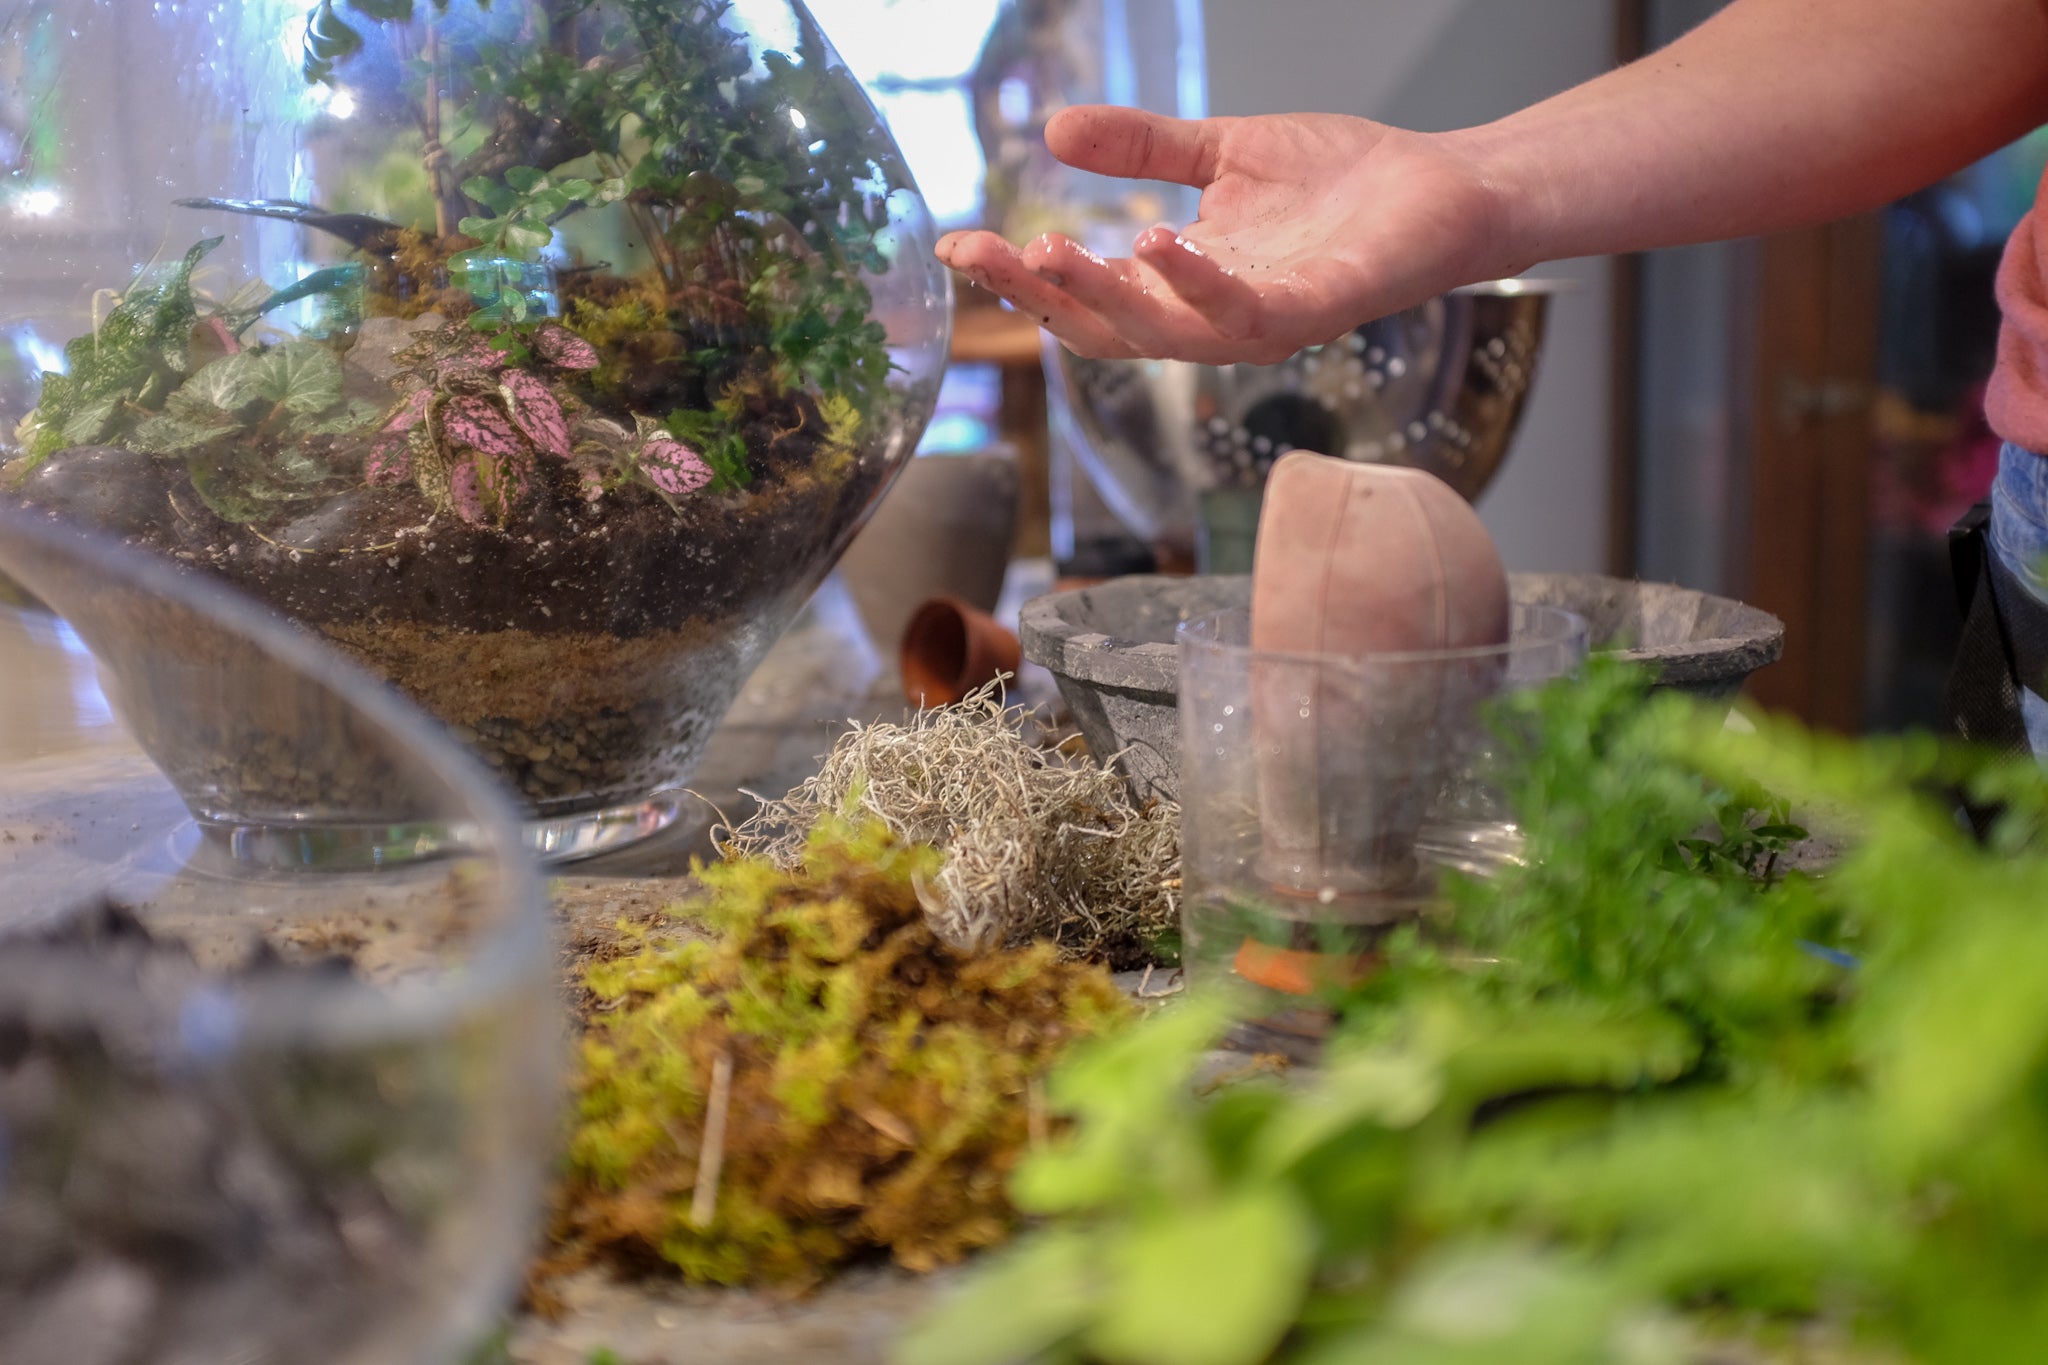 An open hand gestures towards glass terrariums that are filled with plants and moss